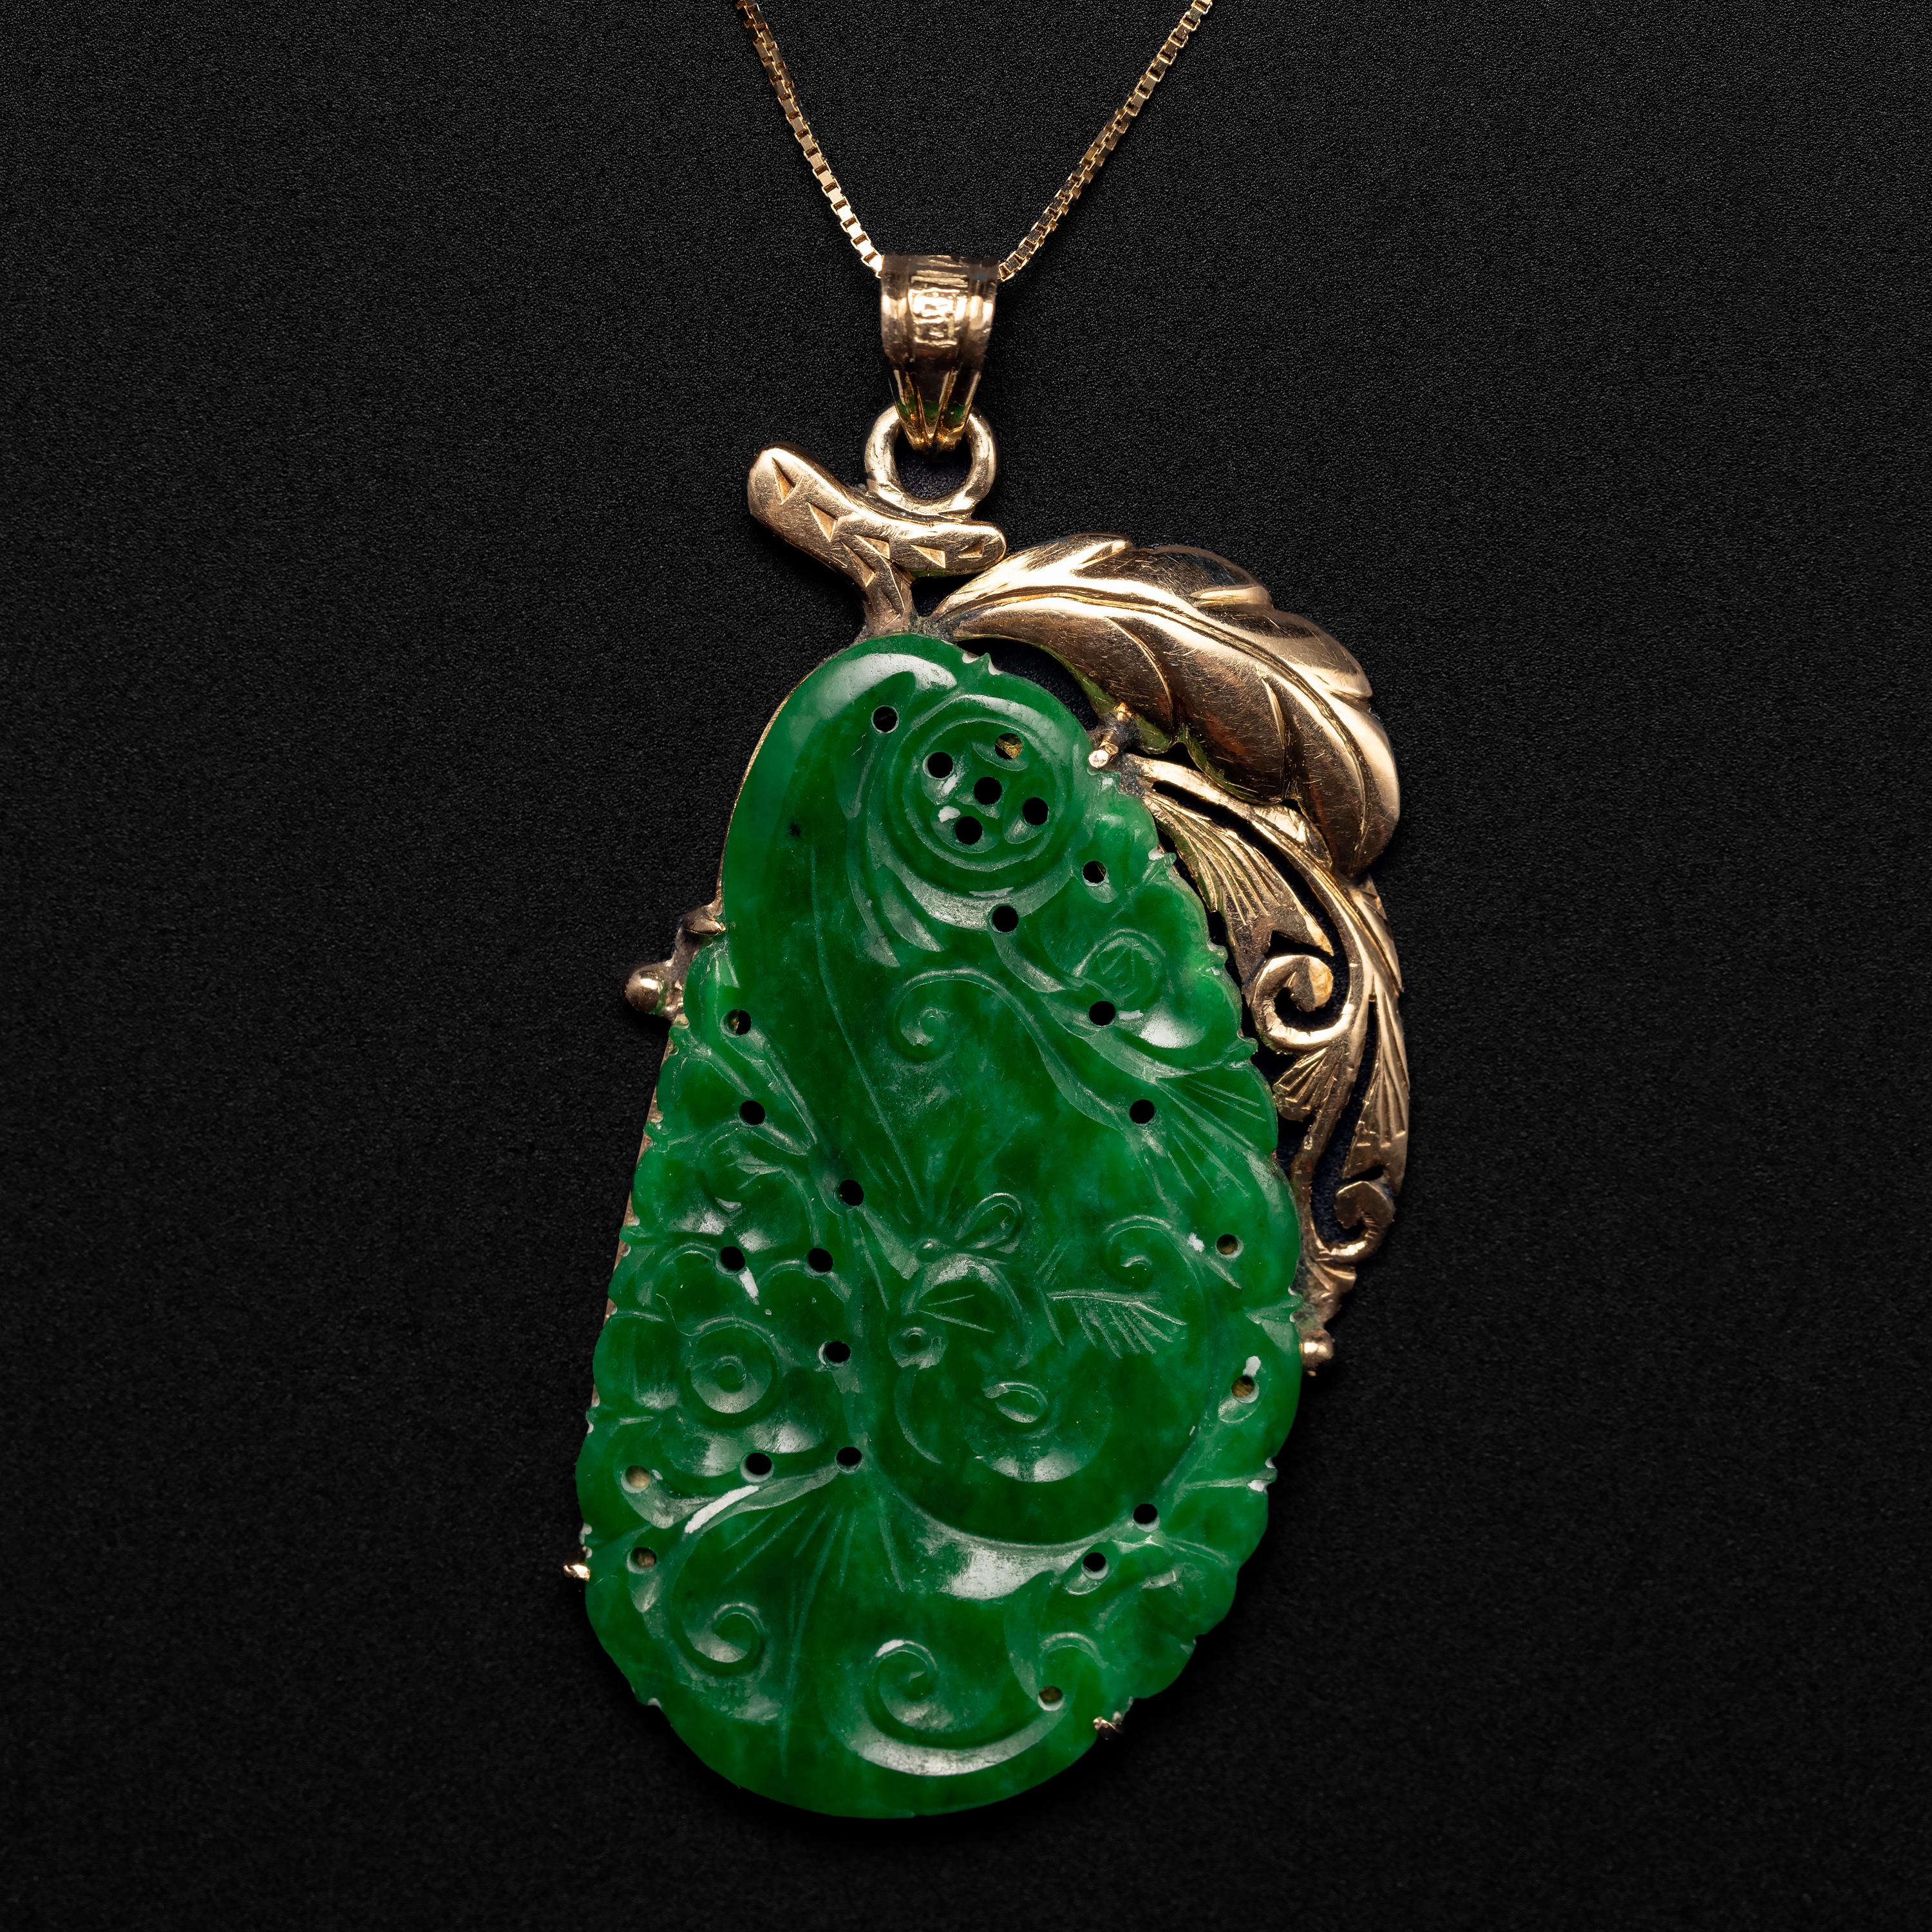 The jade carving you see here is no ordinary jade carving. It is a variety of jade known as kosmochlor jade. What, you ask, is kosmochlor jade? Well, it is also known as chromium jadeite. And chromium is the chemical element that gives jadeite its